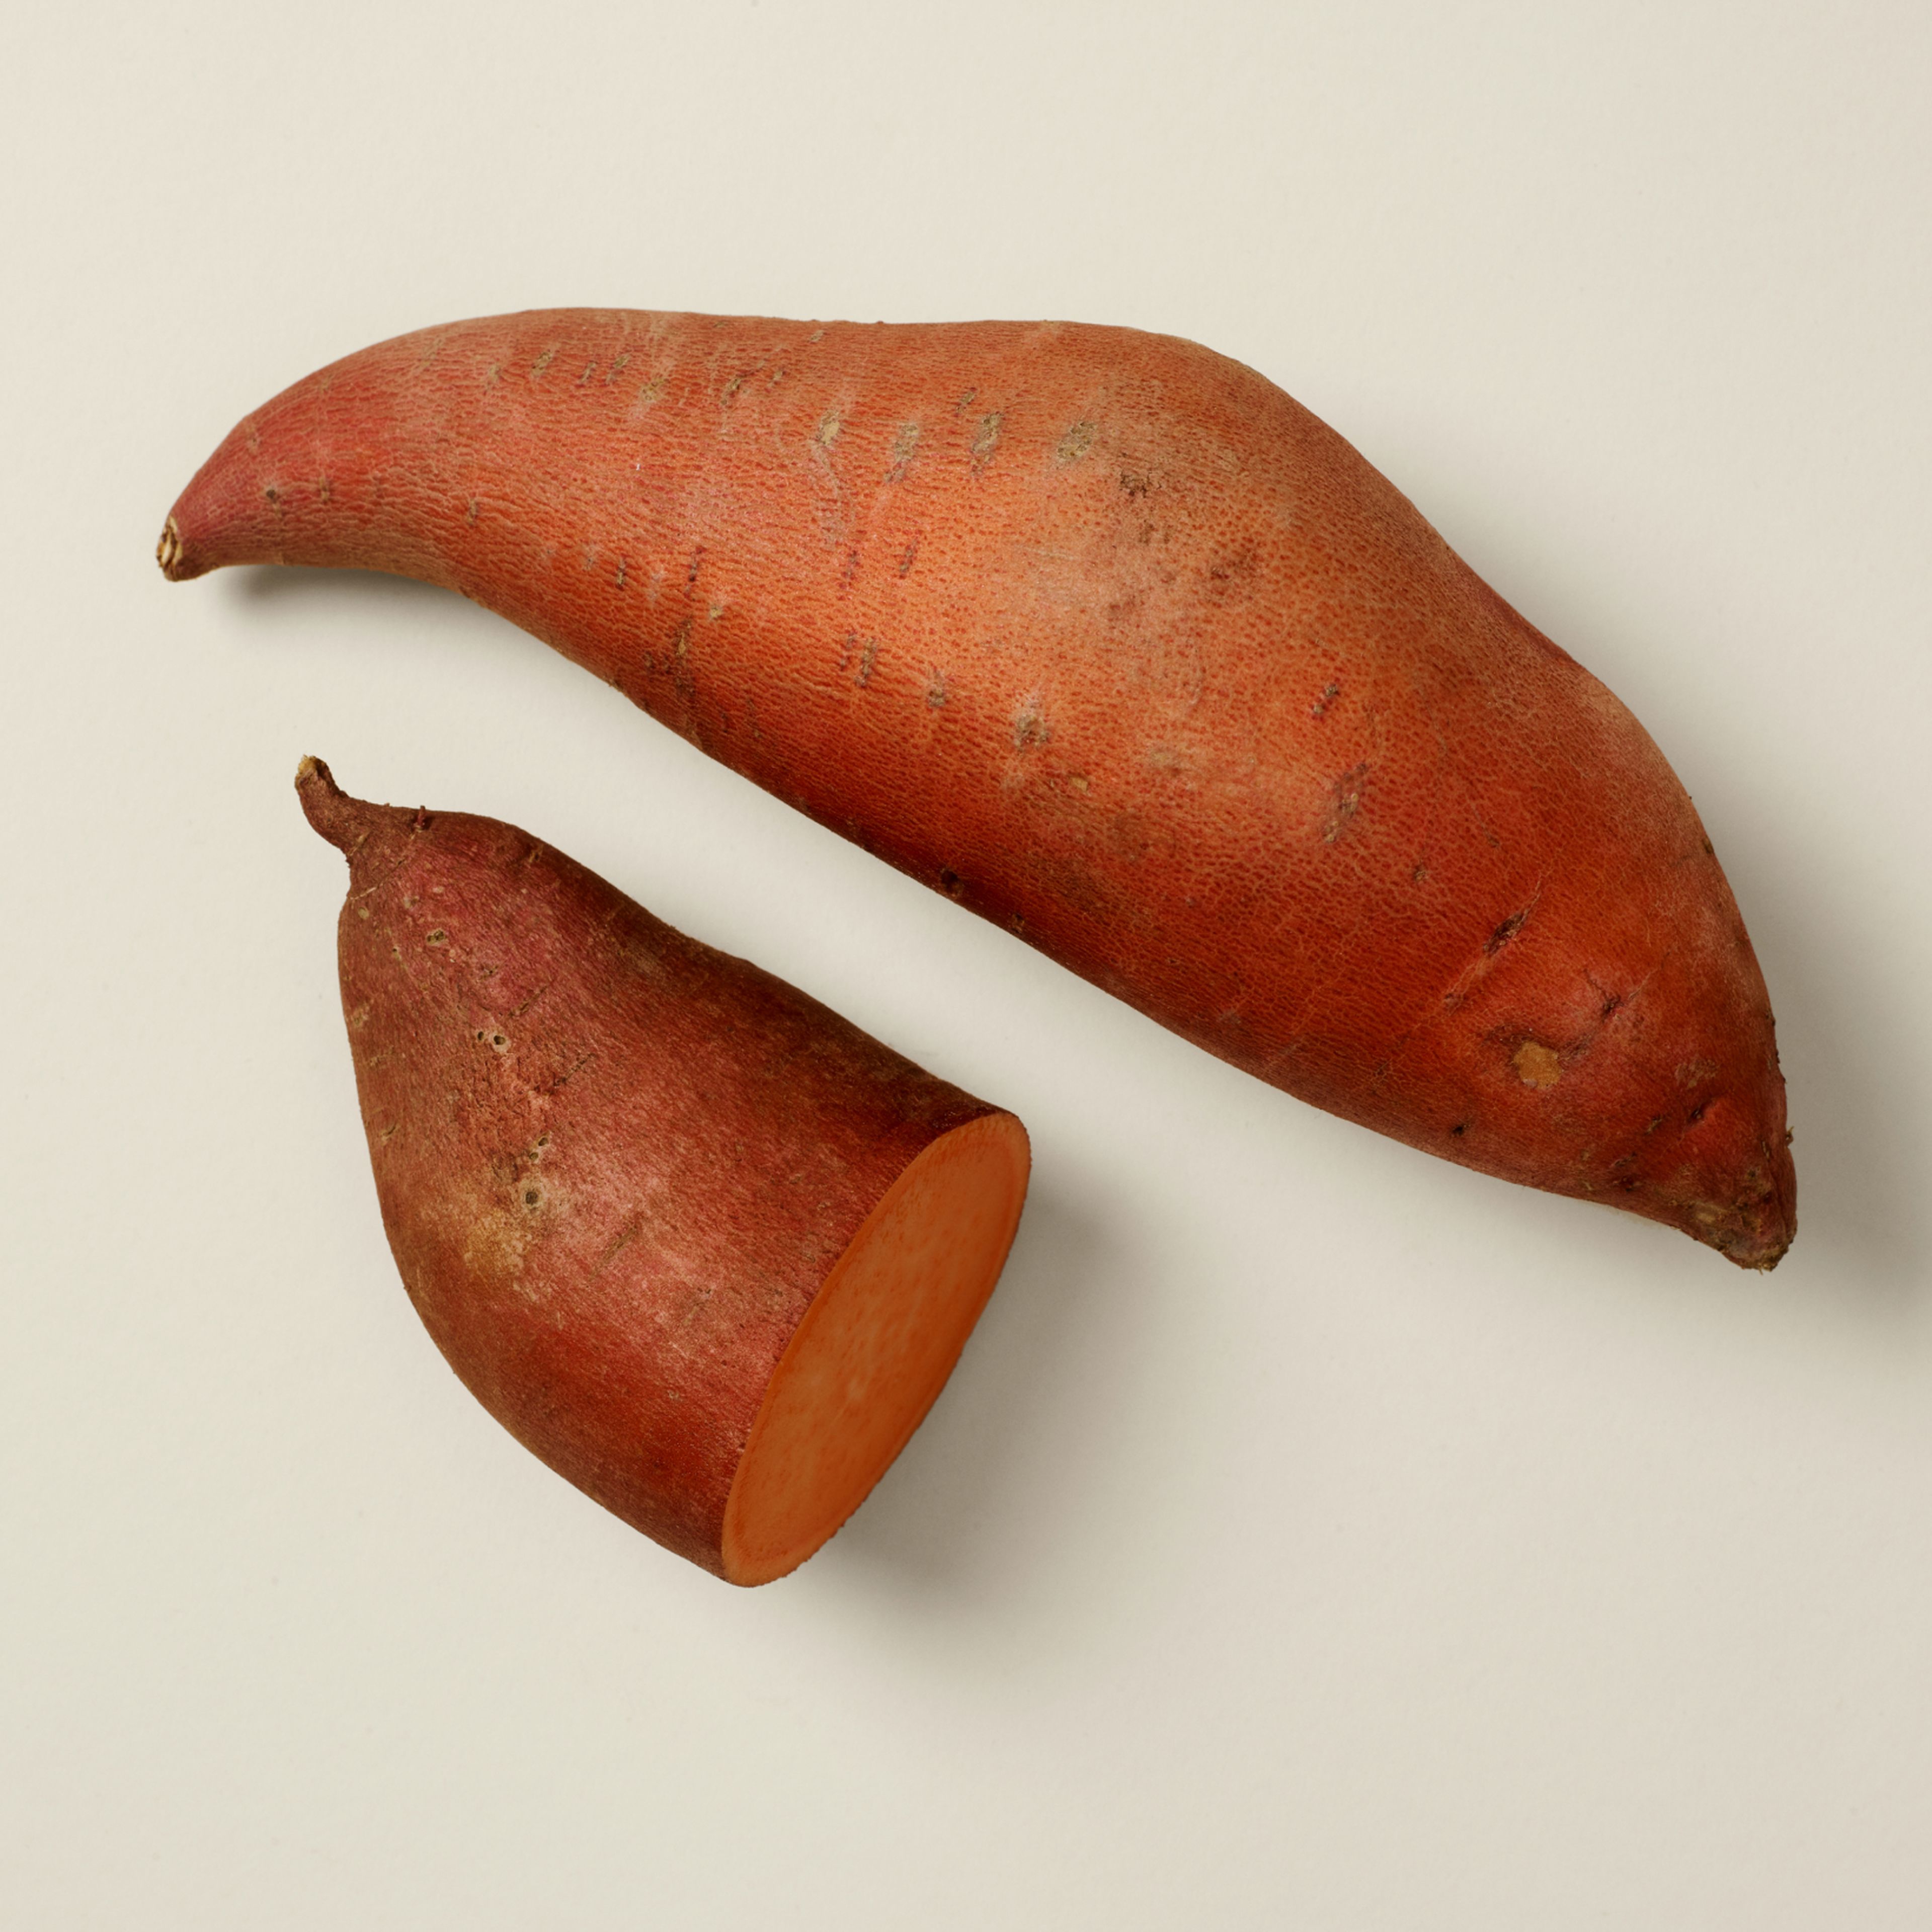 Pieces of sweet potatoes